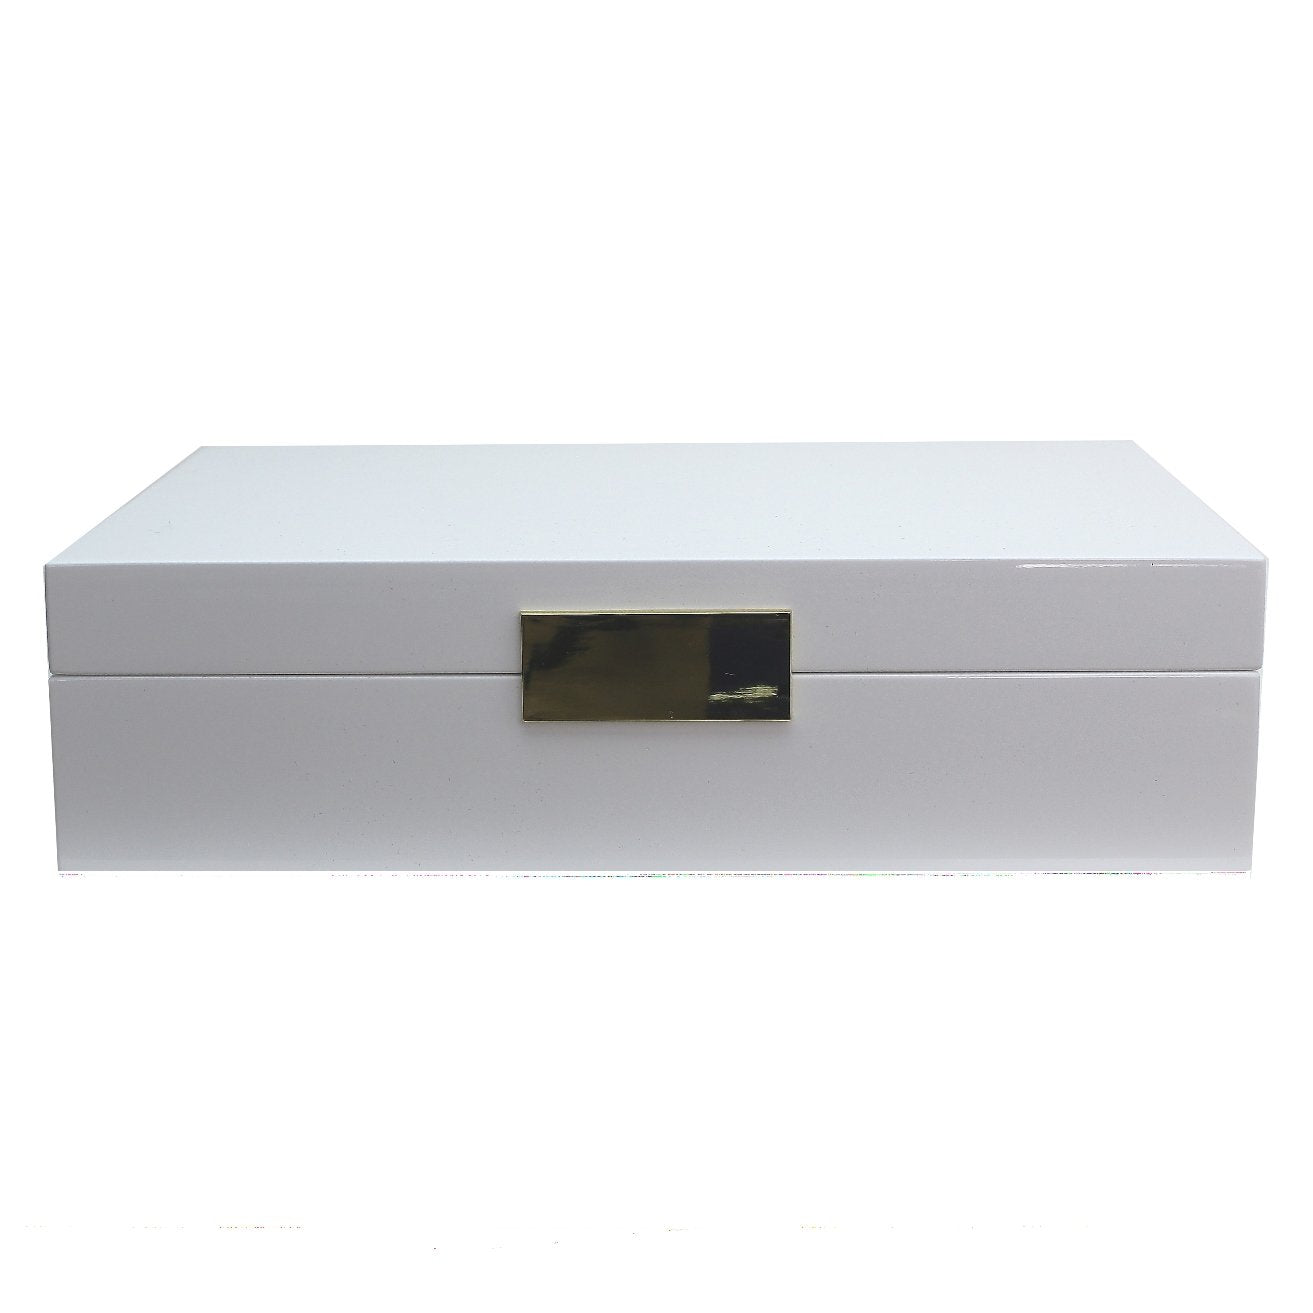 Large white watch box with gold plated clasp